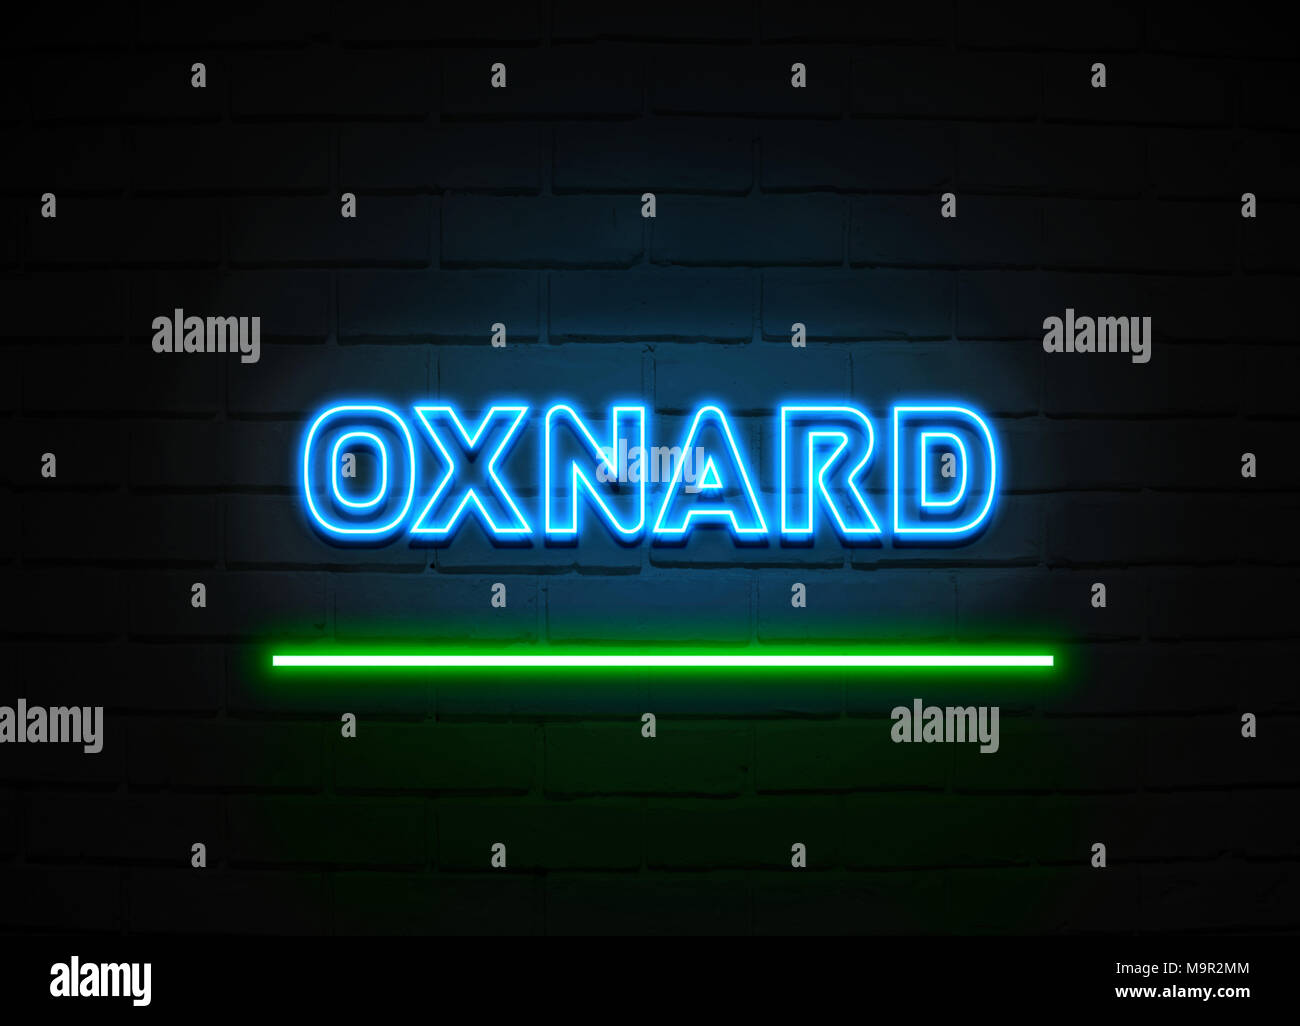 Oxnard neon sign - Glowing Neon Sign on brickwall wall - 3D rendered royalty free stock illustration. Stock Photo